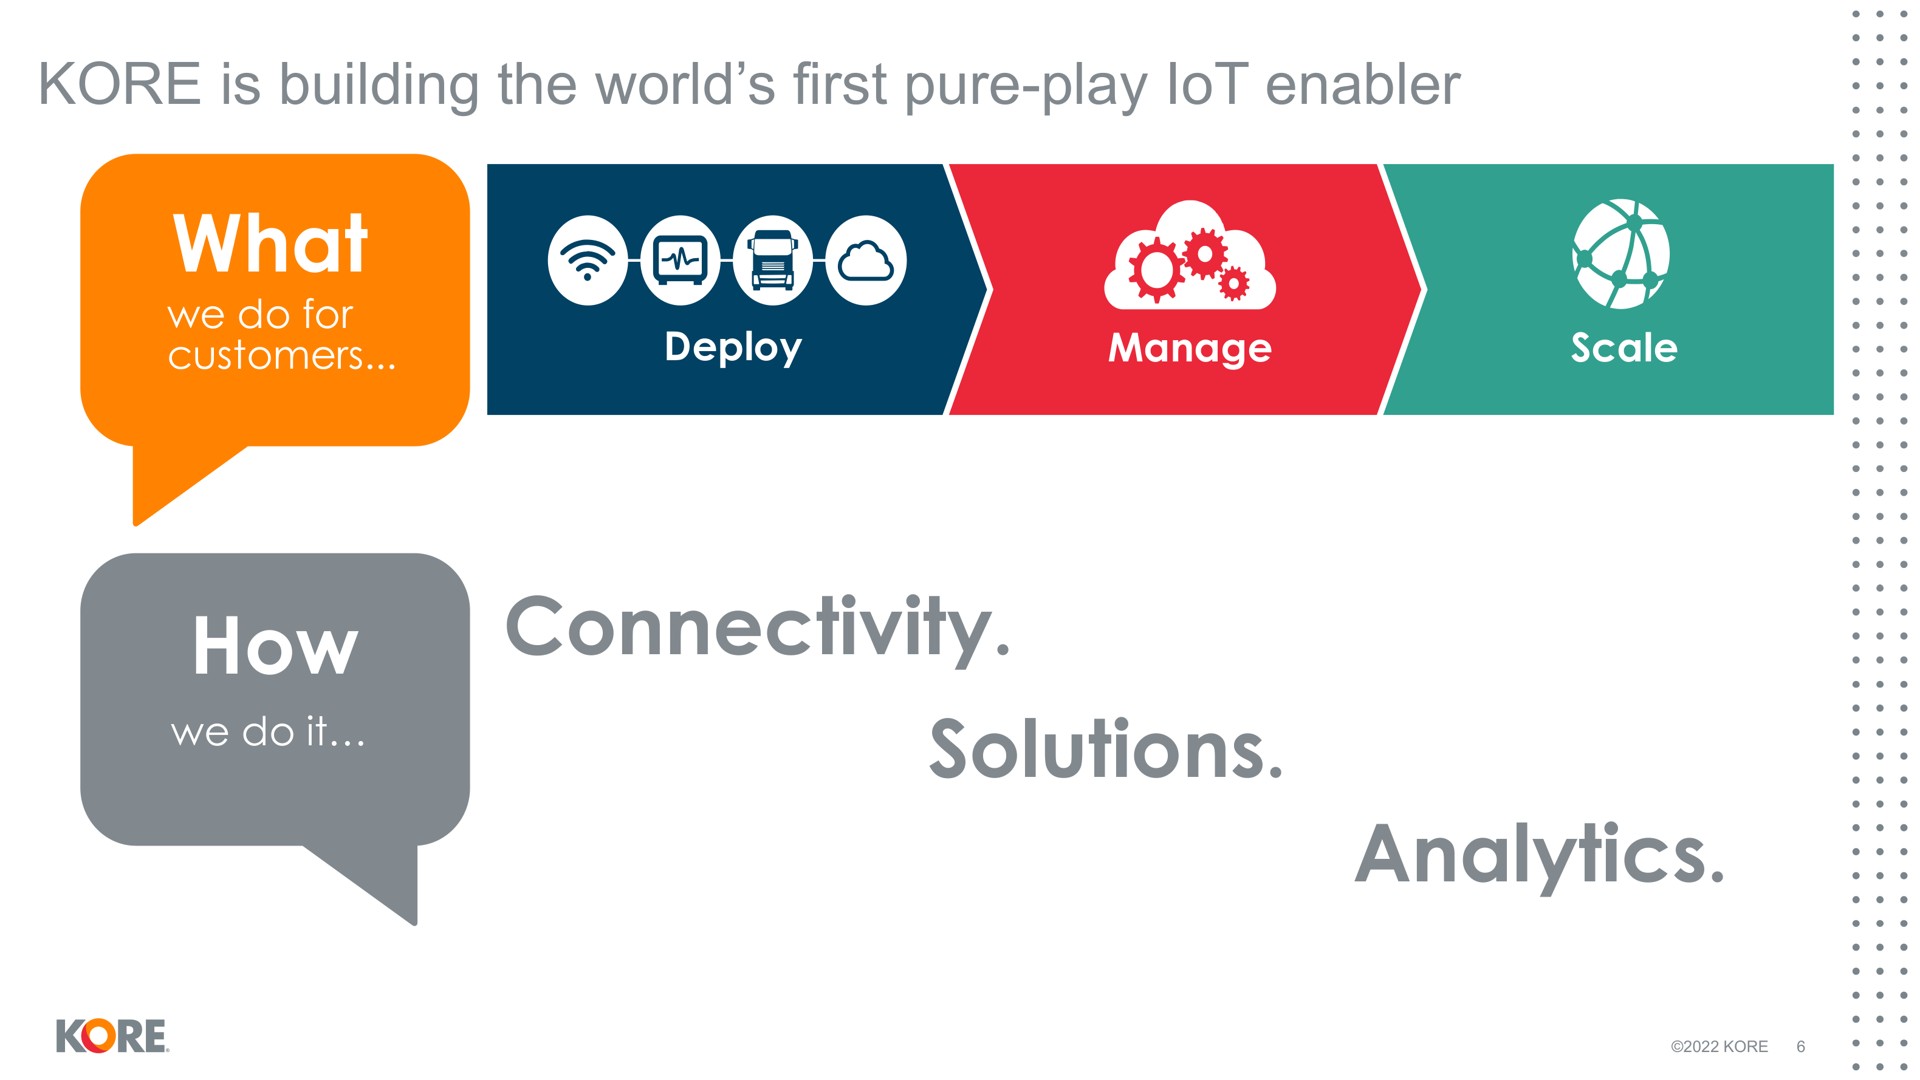 kore is building the world first pure play enabler what how connectivity solutions analytics lot manage customers sole | Kore